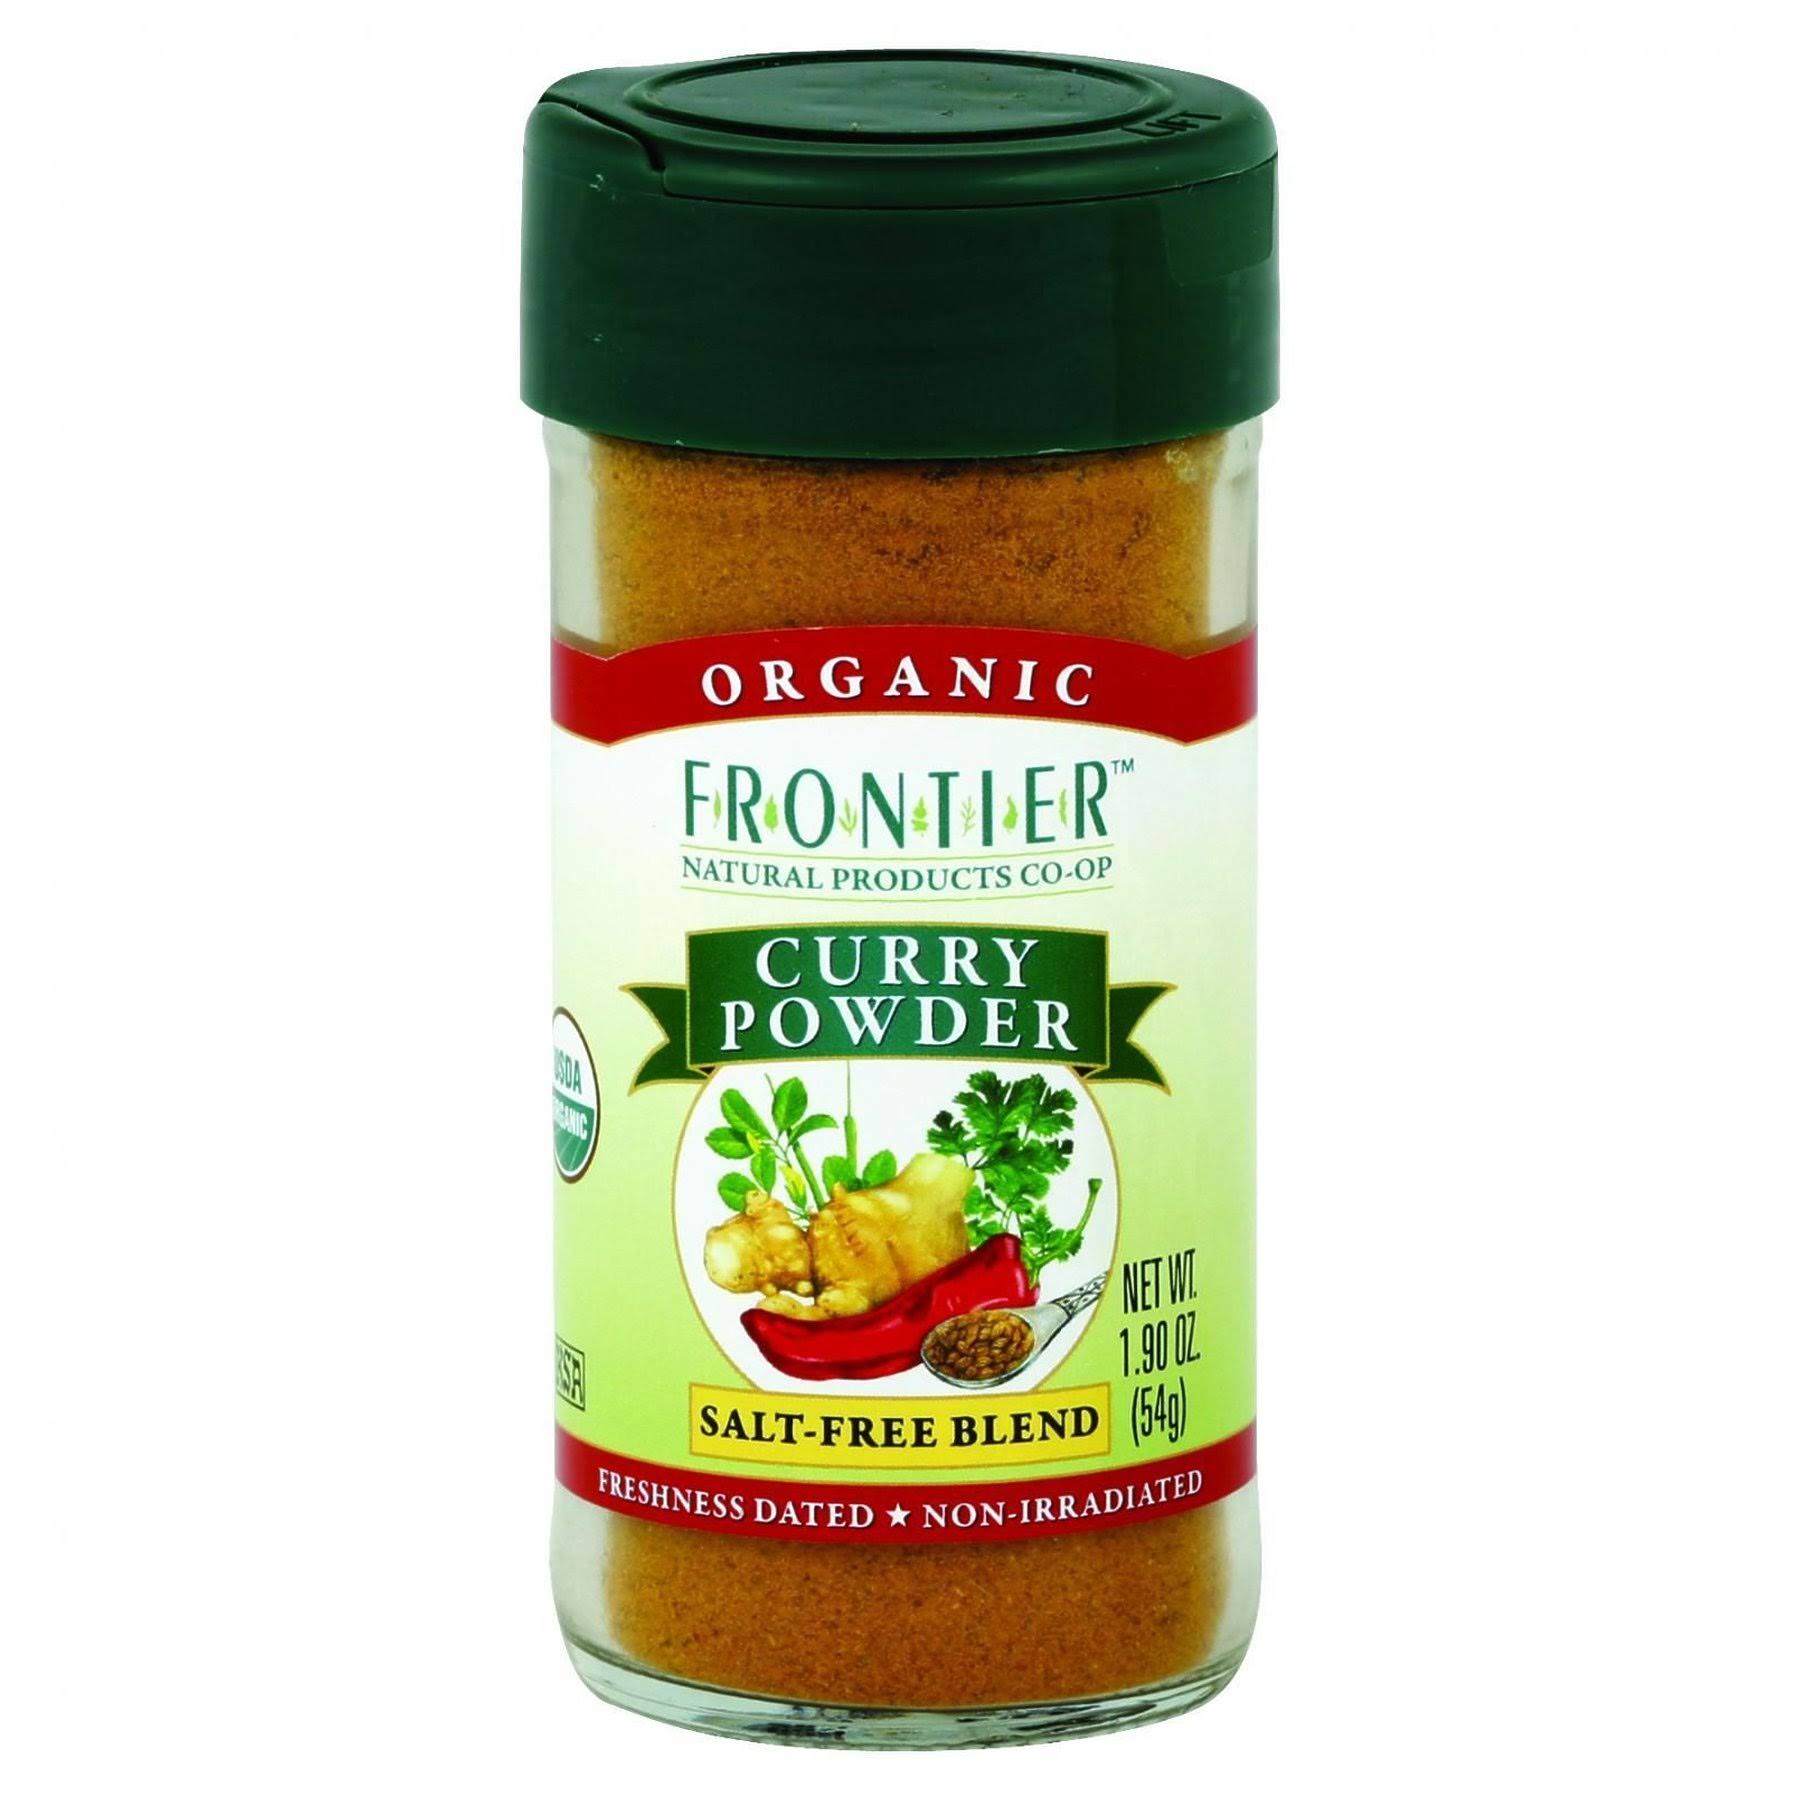 Frontier Organic Curry Powder - 54g